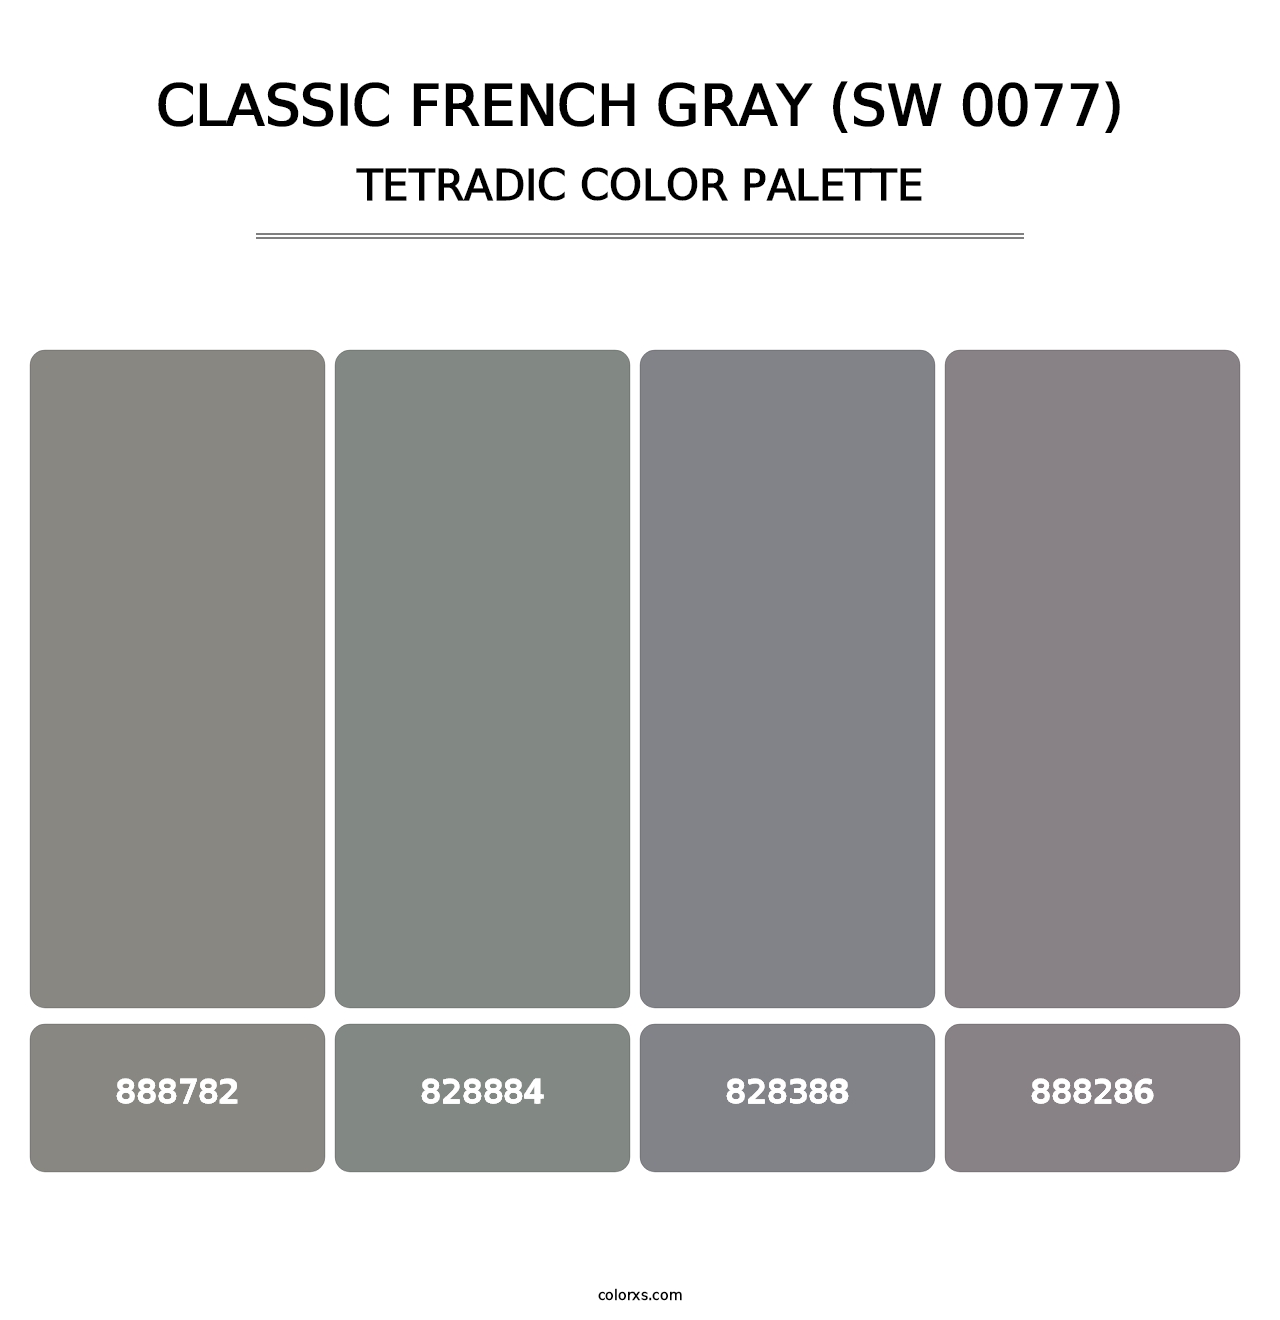 Classic French Gray (SW 0077) - Tetradic Color Palette